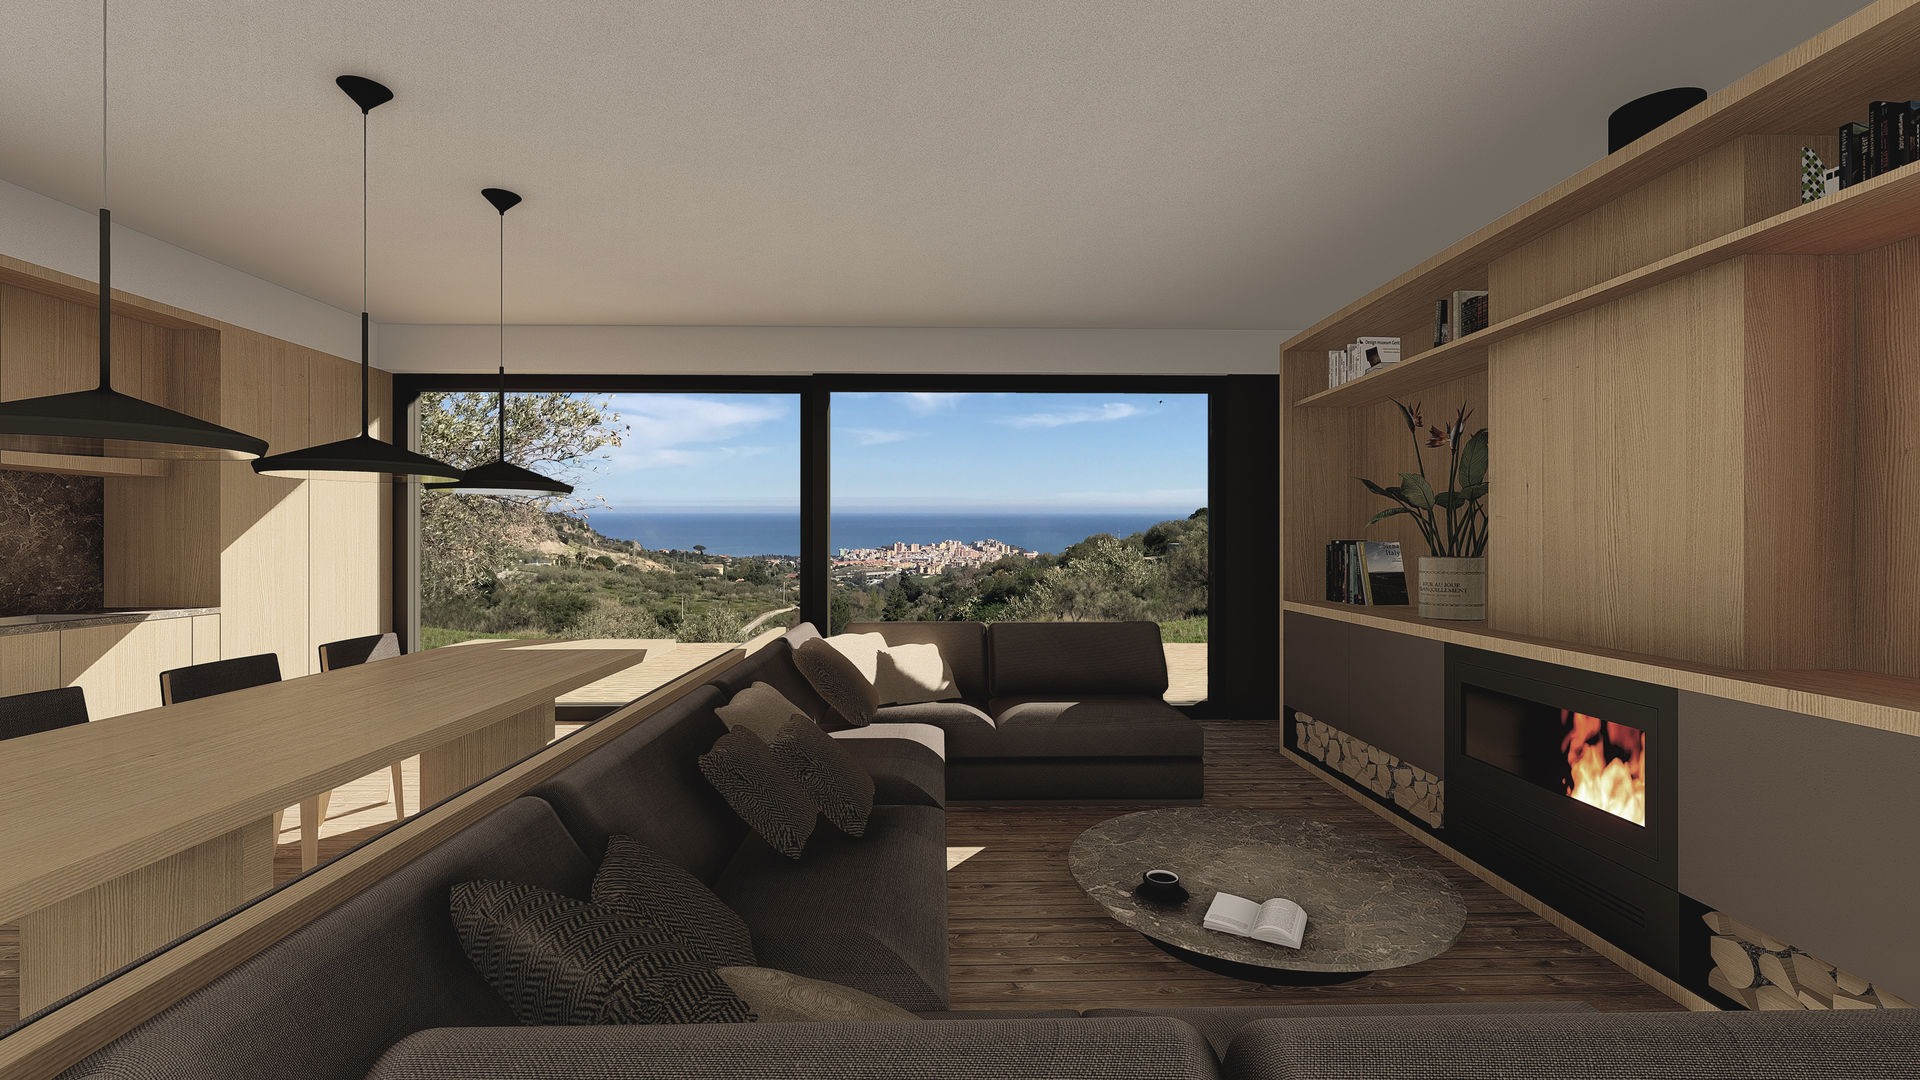 WOODEN HOUSE G|C – SICILY, ALESSIO LO BELLO ARCHITETTO a Palermo ALESSIO LO BELLO ARCHITETTO a Palermo Living room Wood Wood effect sea view, fireplace, marble table, living room, wooden house, country house, panoramic glass window